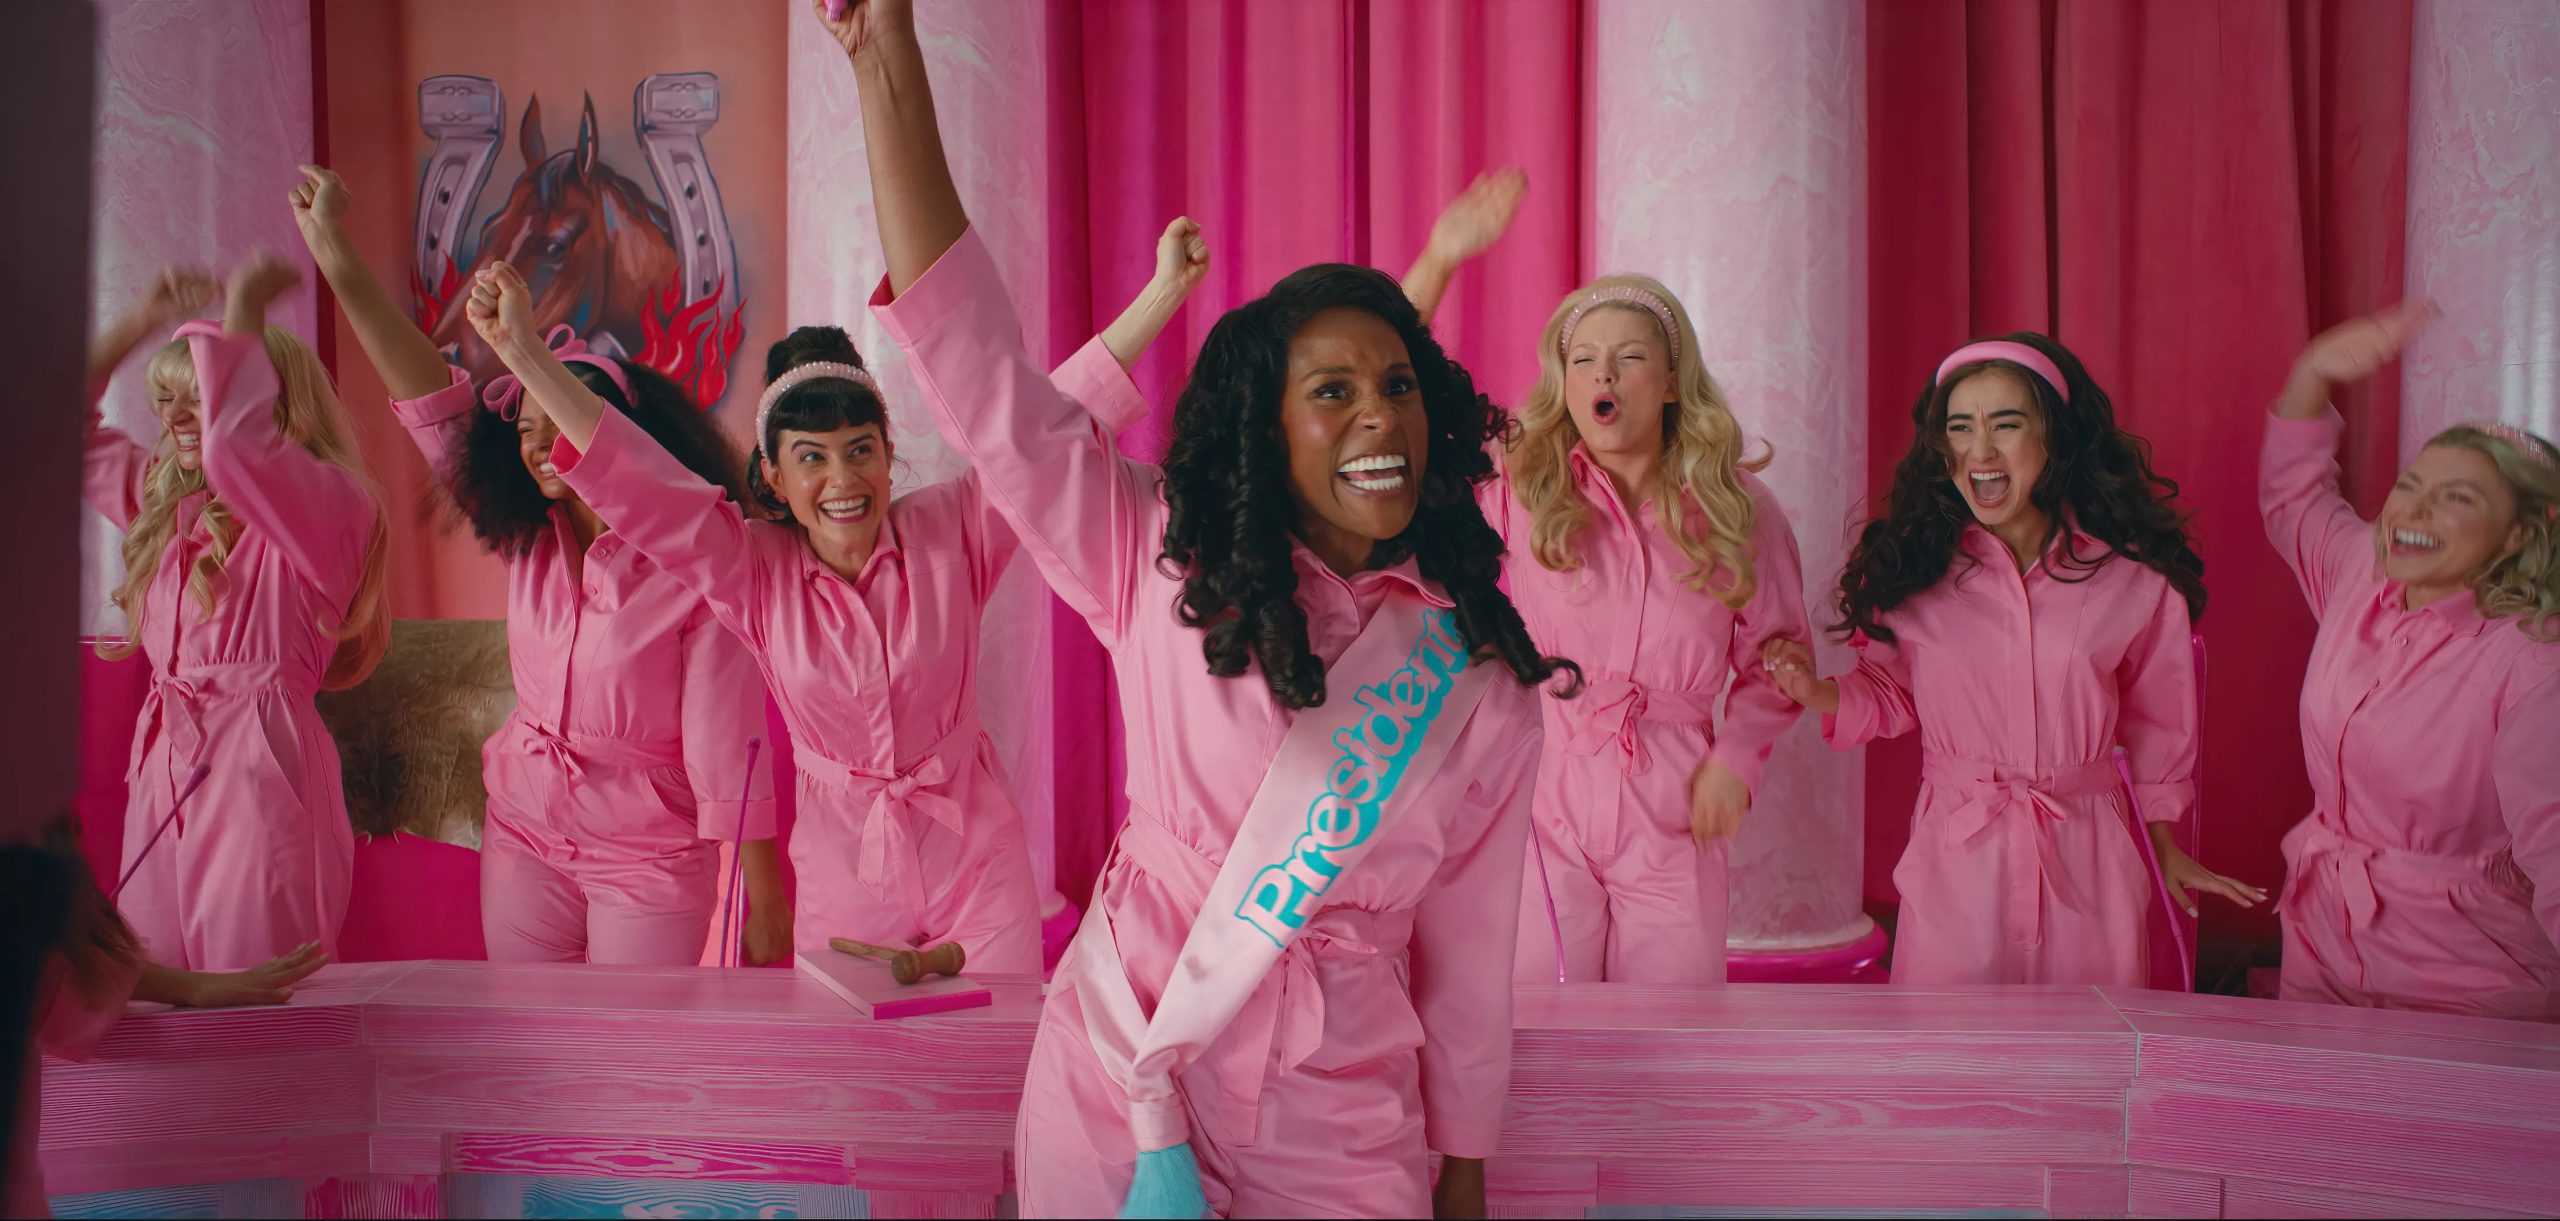 A still shot of Issa Rae as "President Barbie" alongside other cast members of the Barbie movie